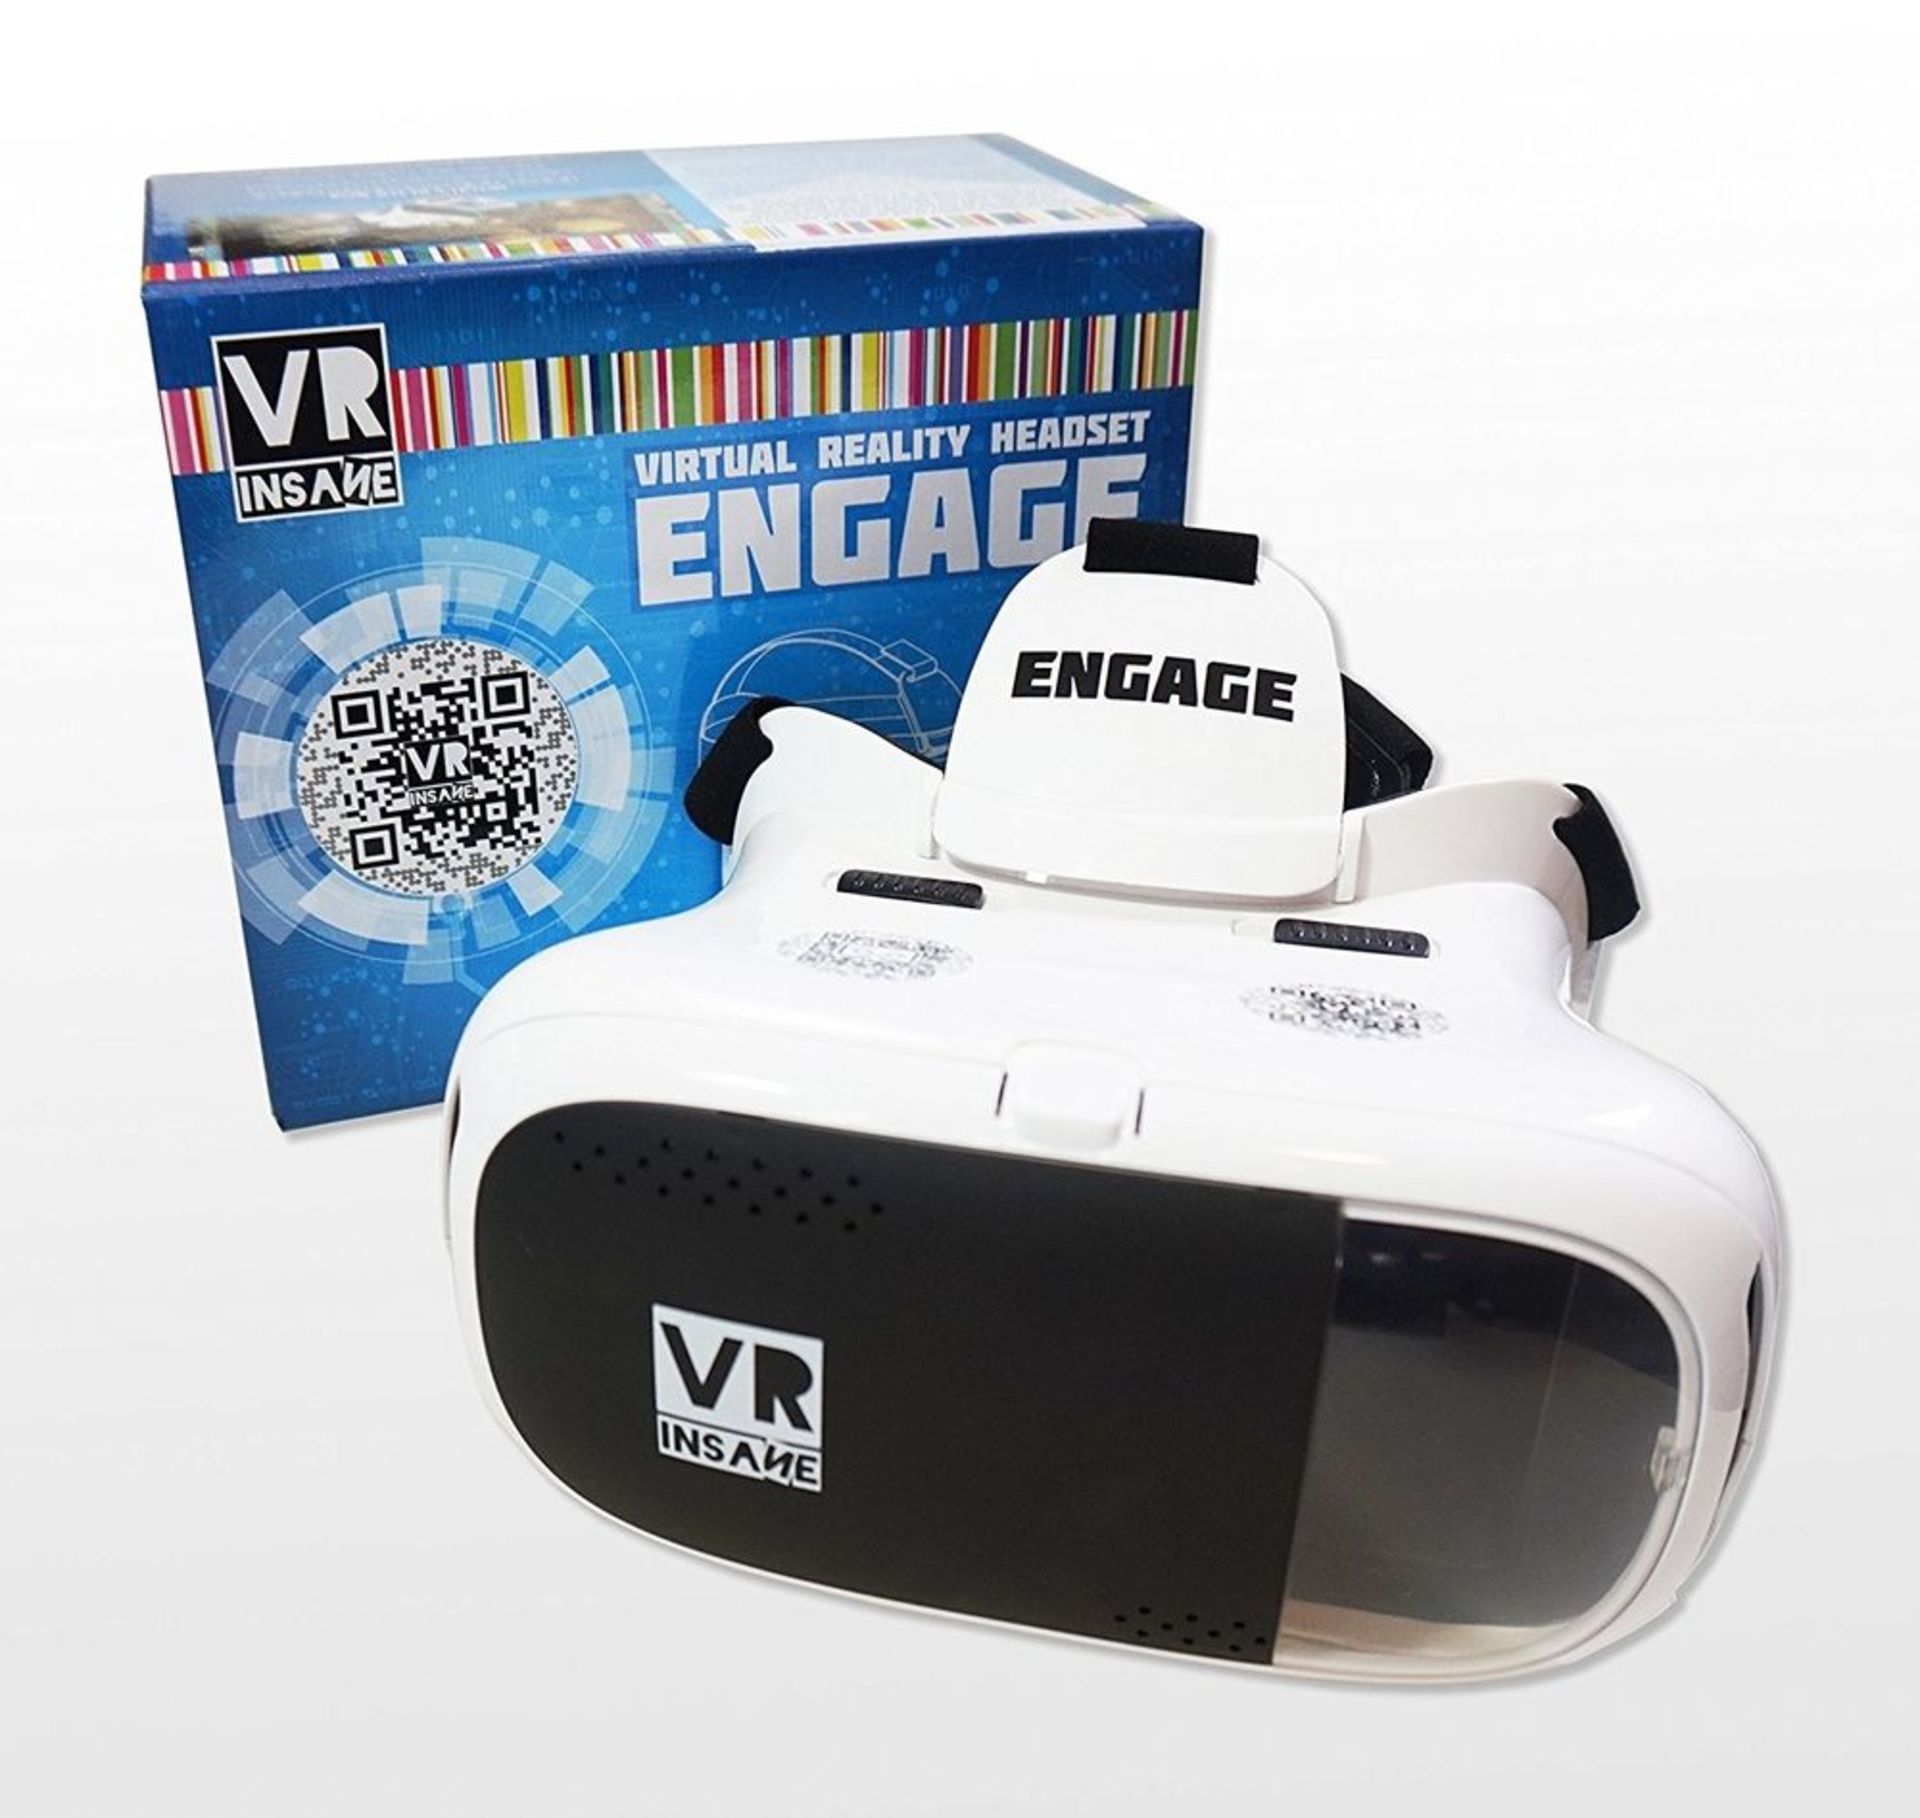 V *TRADE QTY* Brand New Engage Virtual Reality Headset With Adjustable Lenses - Spectacle Friendly -